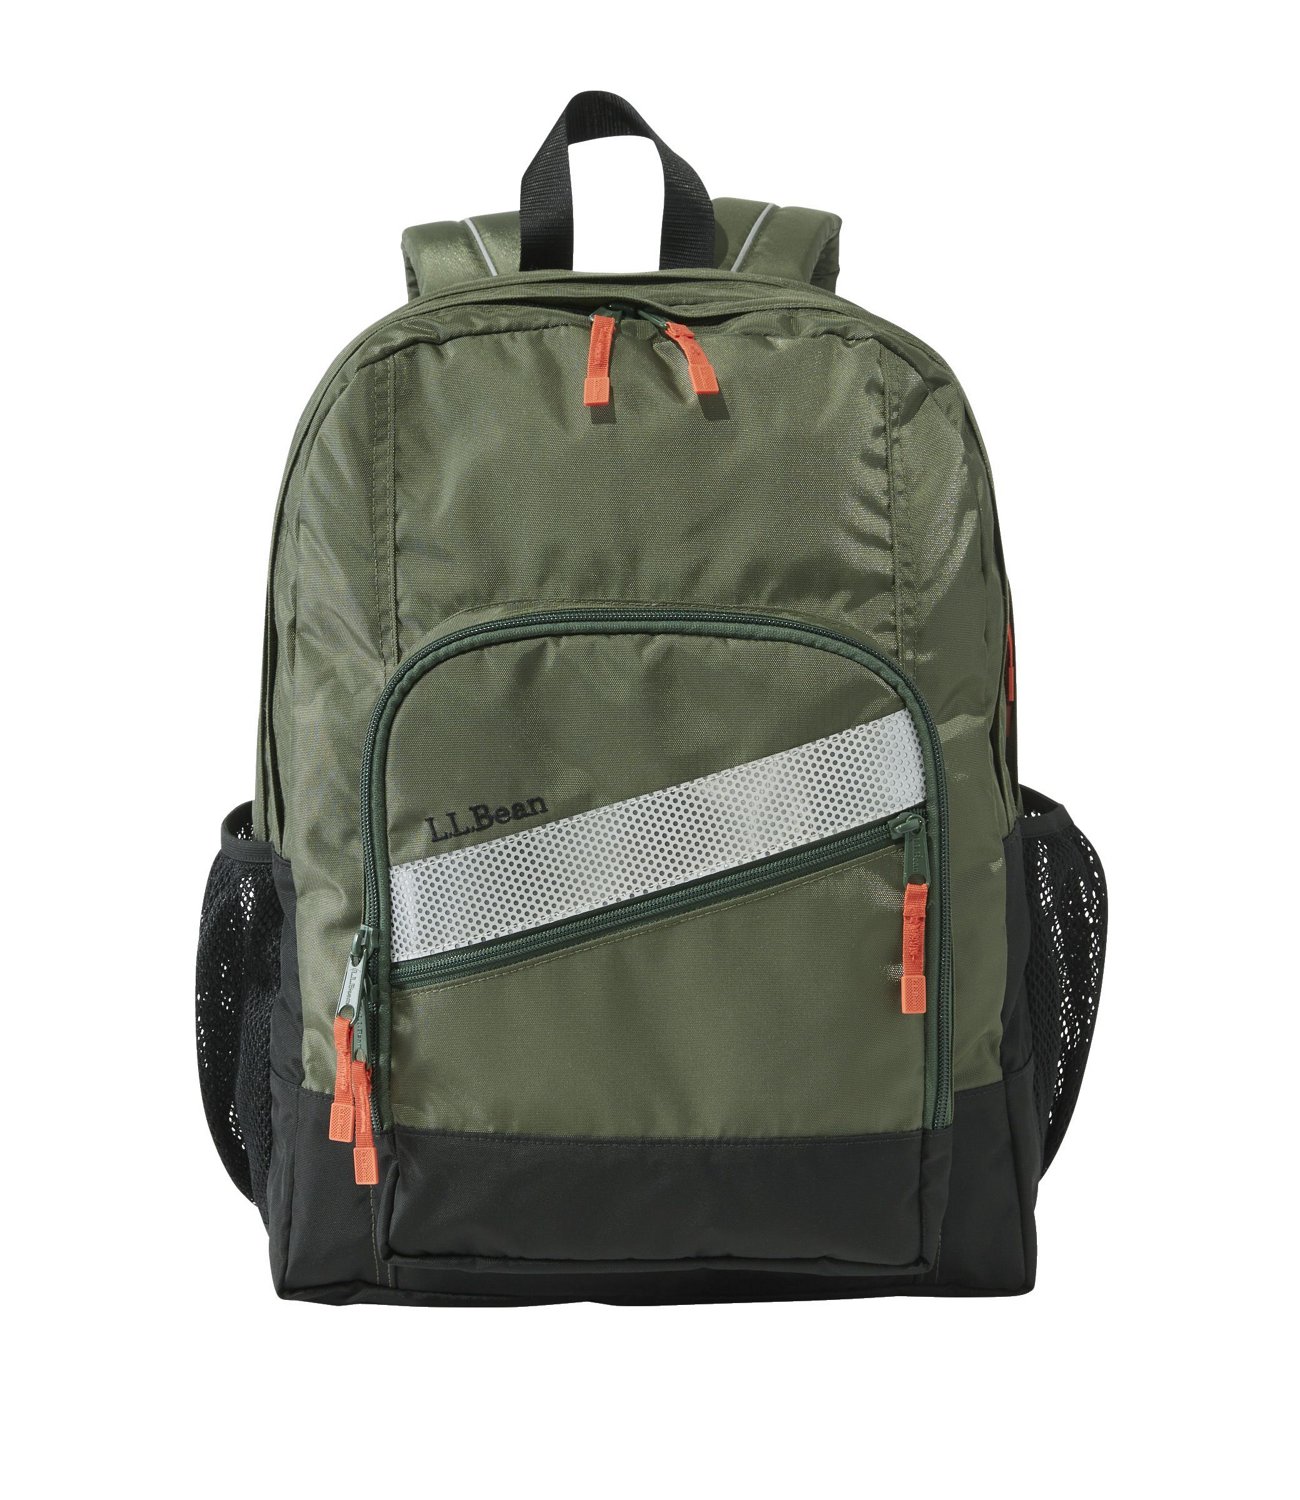 https://academy.scene7.com/is/image/academy//bags---backpacks/llbean-deluxe-backpack-137988-green/84ccac9f77714af4920c4ce795a831c4?$d-plp-product-image$